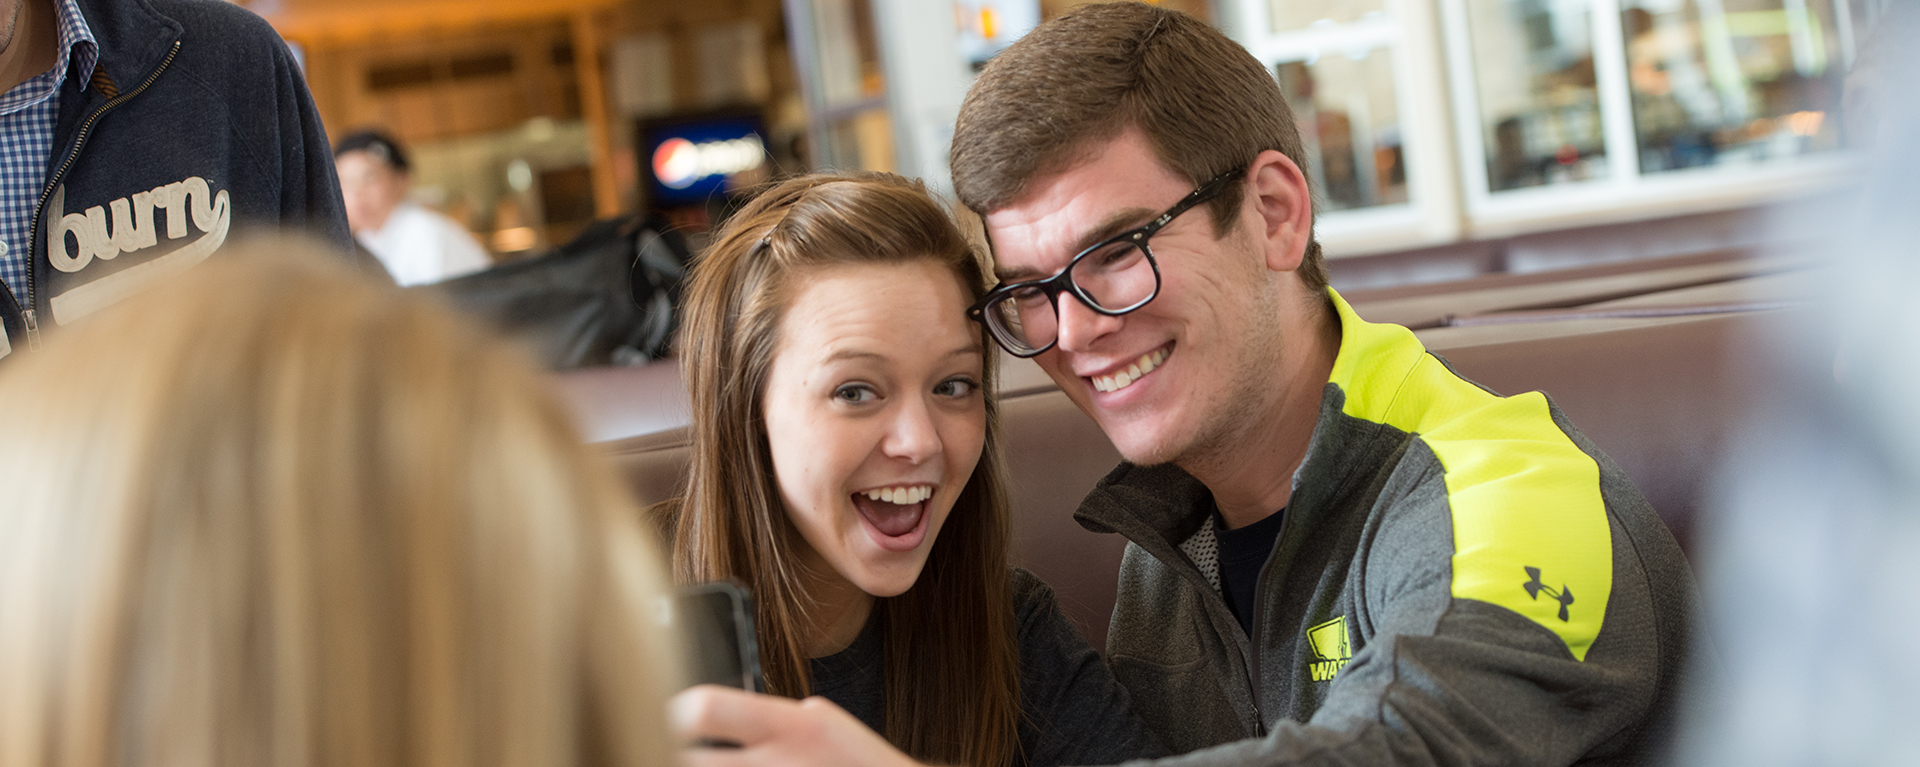 Washburn students take a selfie at the Union Market.